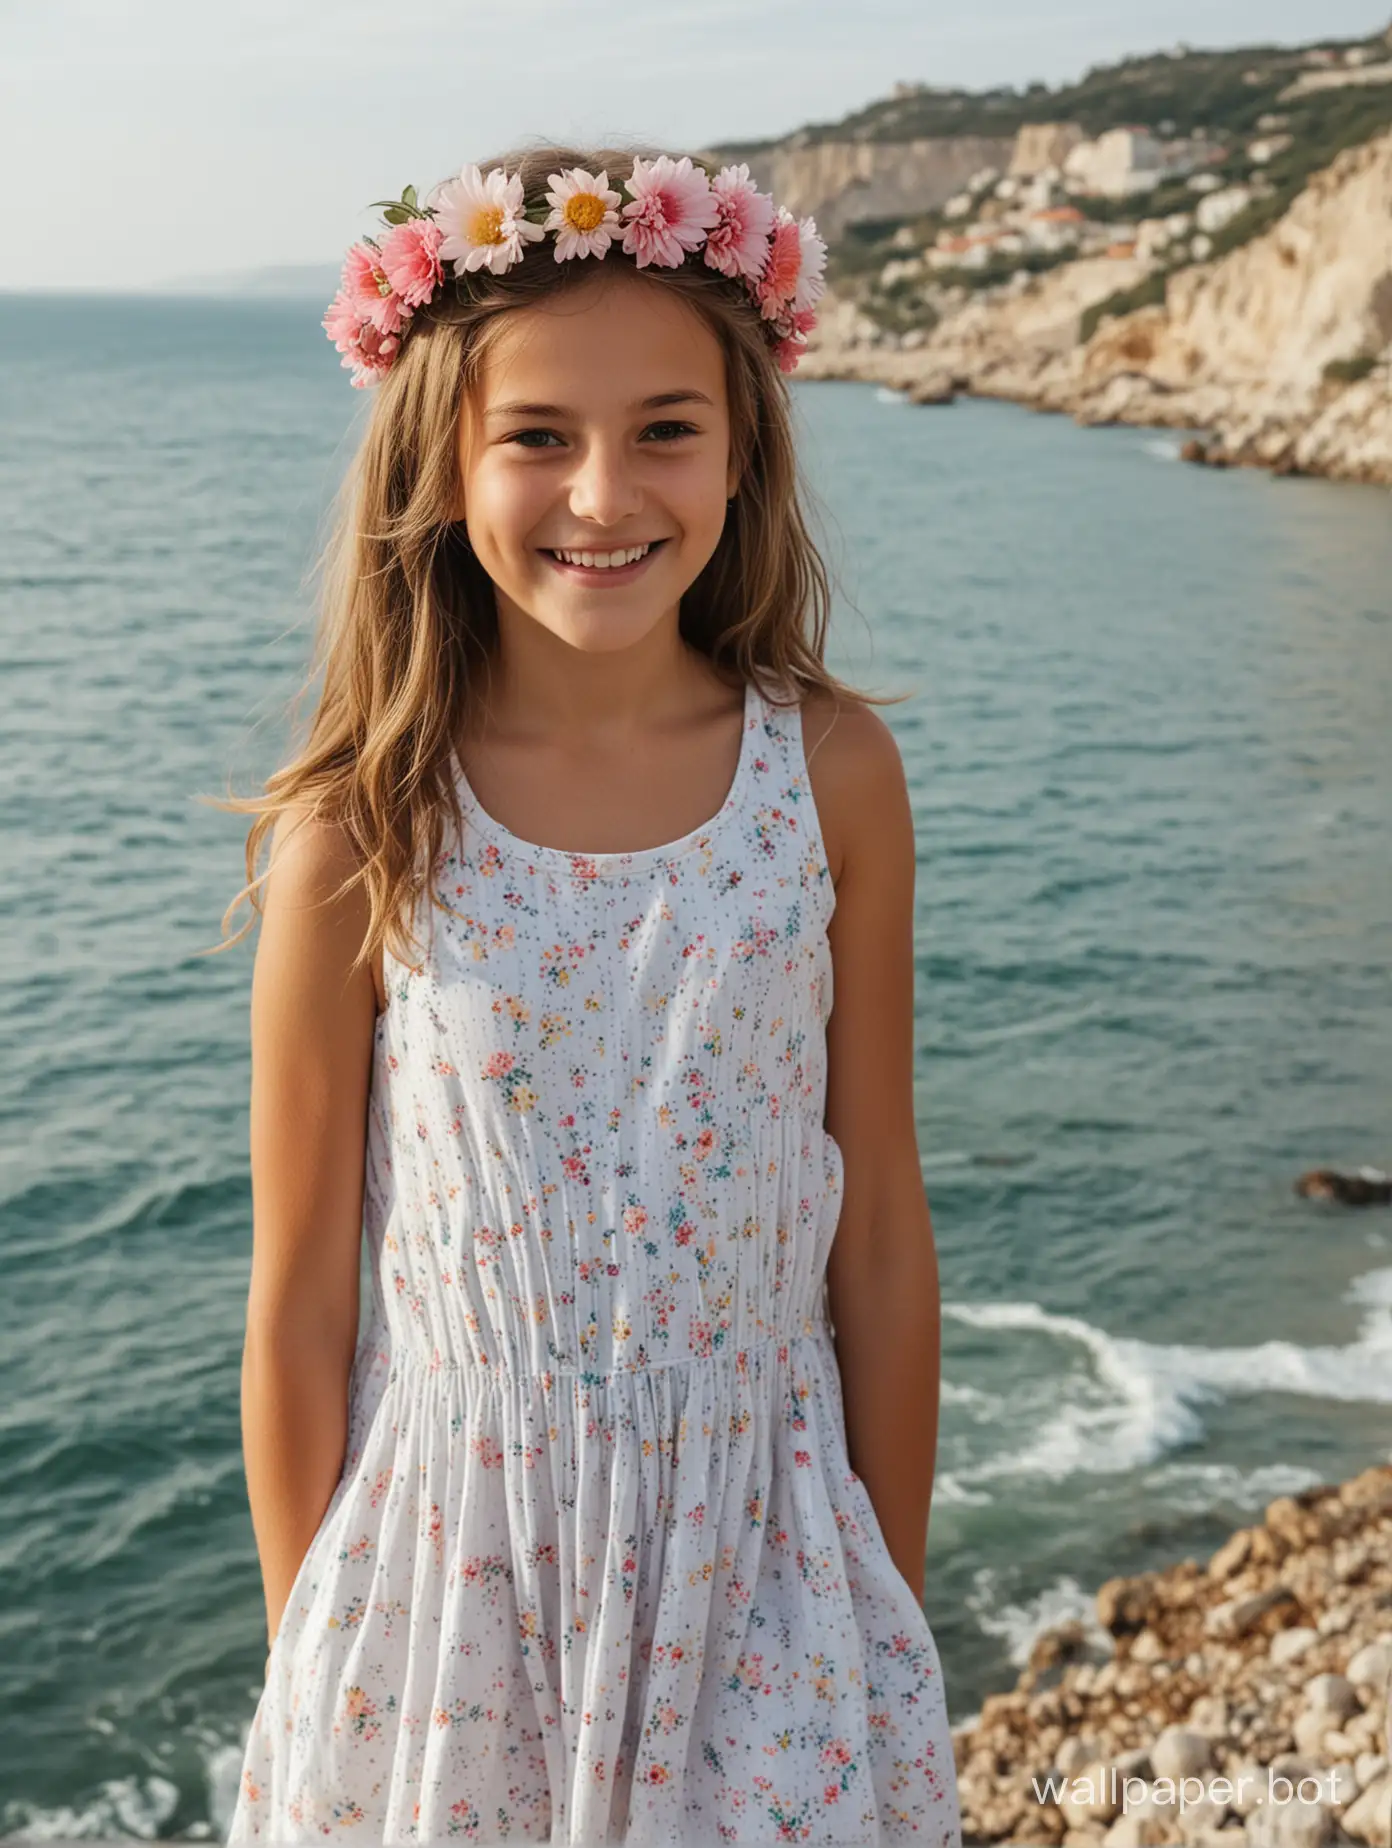 Smiling-11YearOld-Girl-in-Flower-Crown-overlooking-the-Crimean-Sea